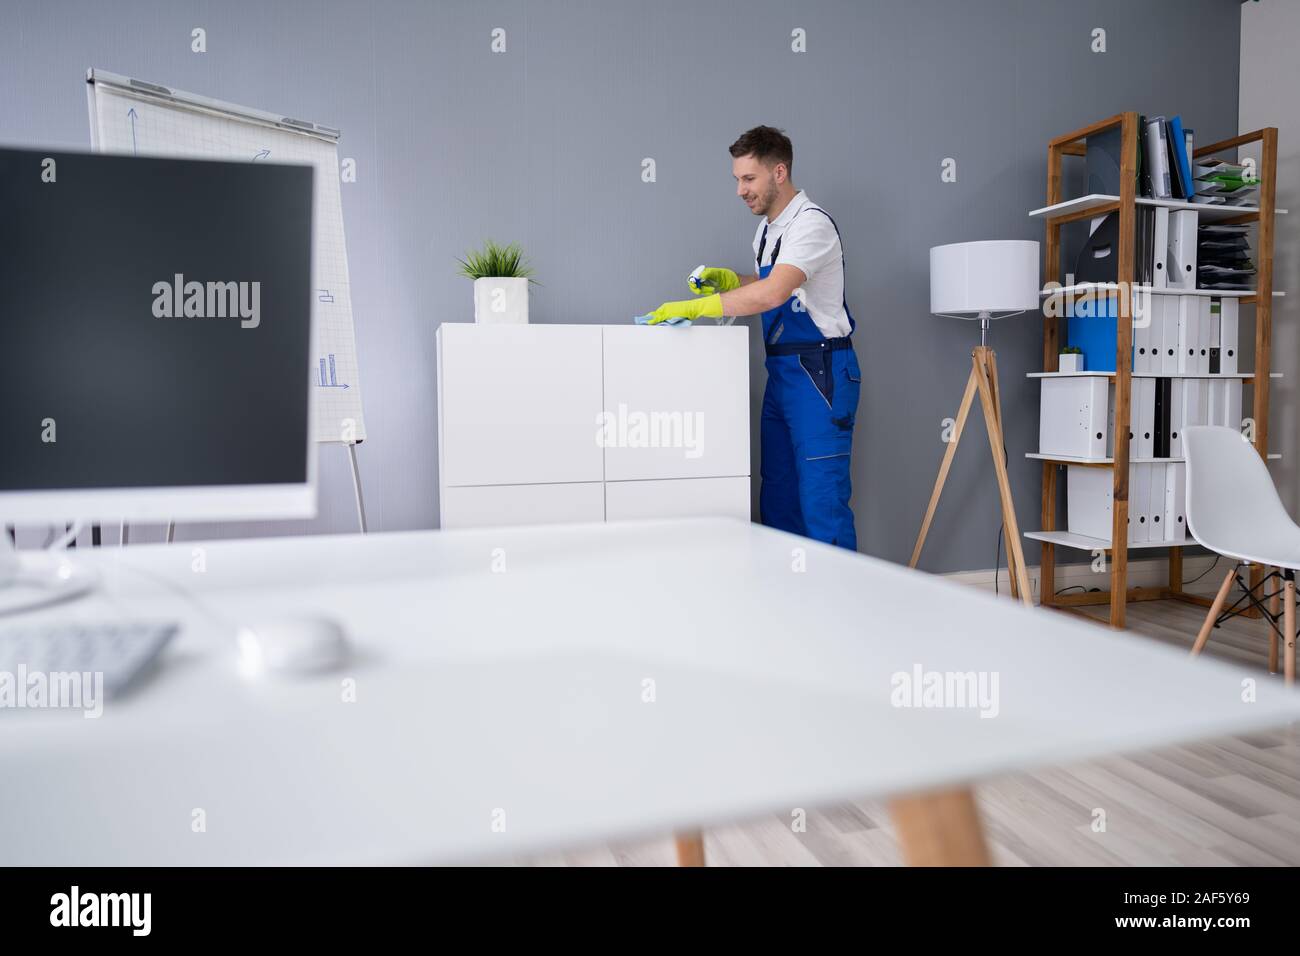 Mid Adult Male Worker Cleaning Shelf With Spray And Sponge At Office Stock Photo